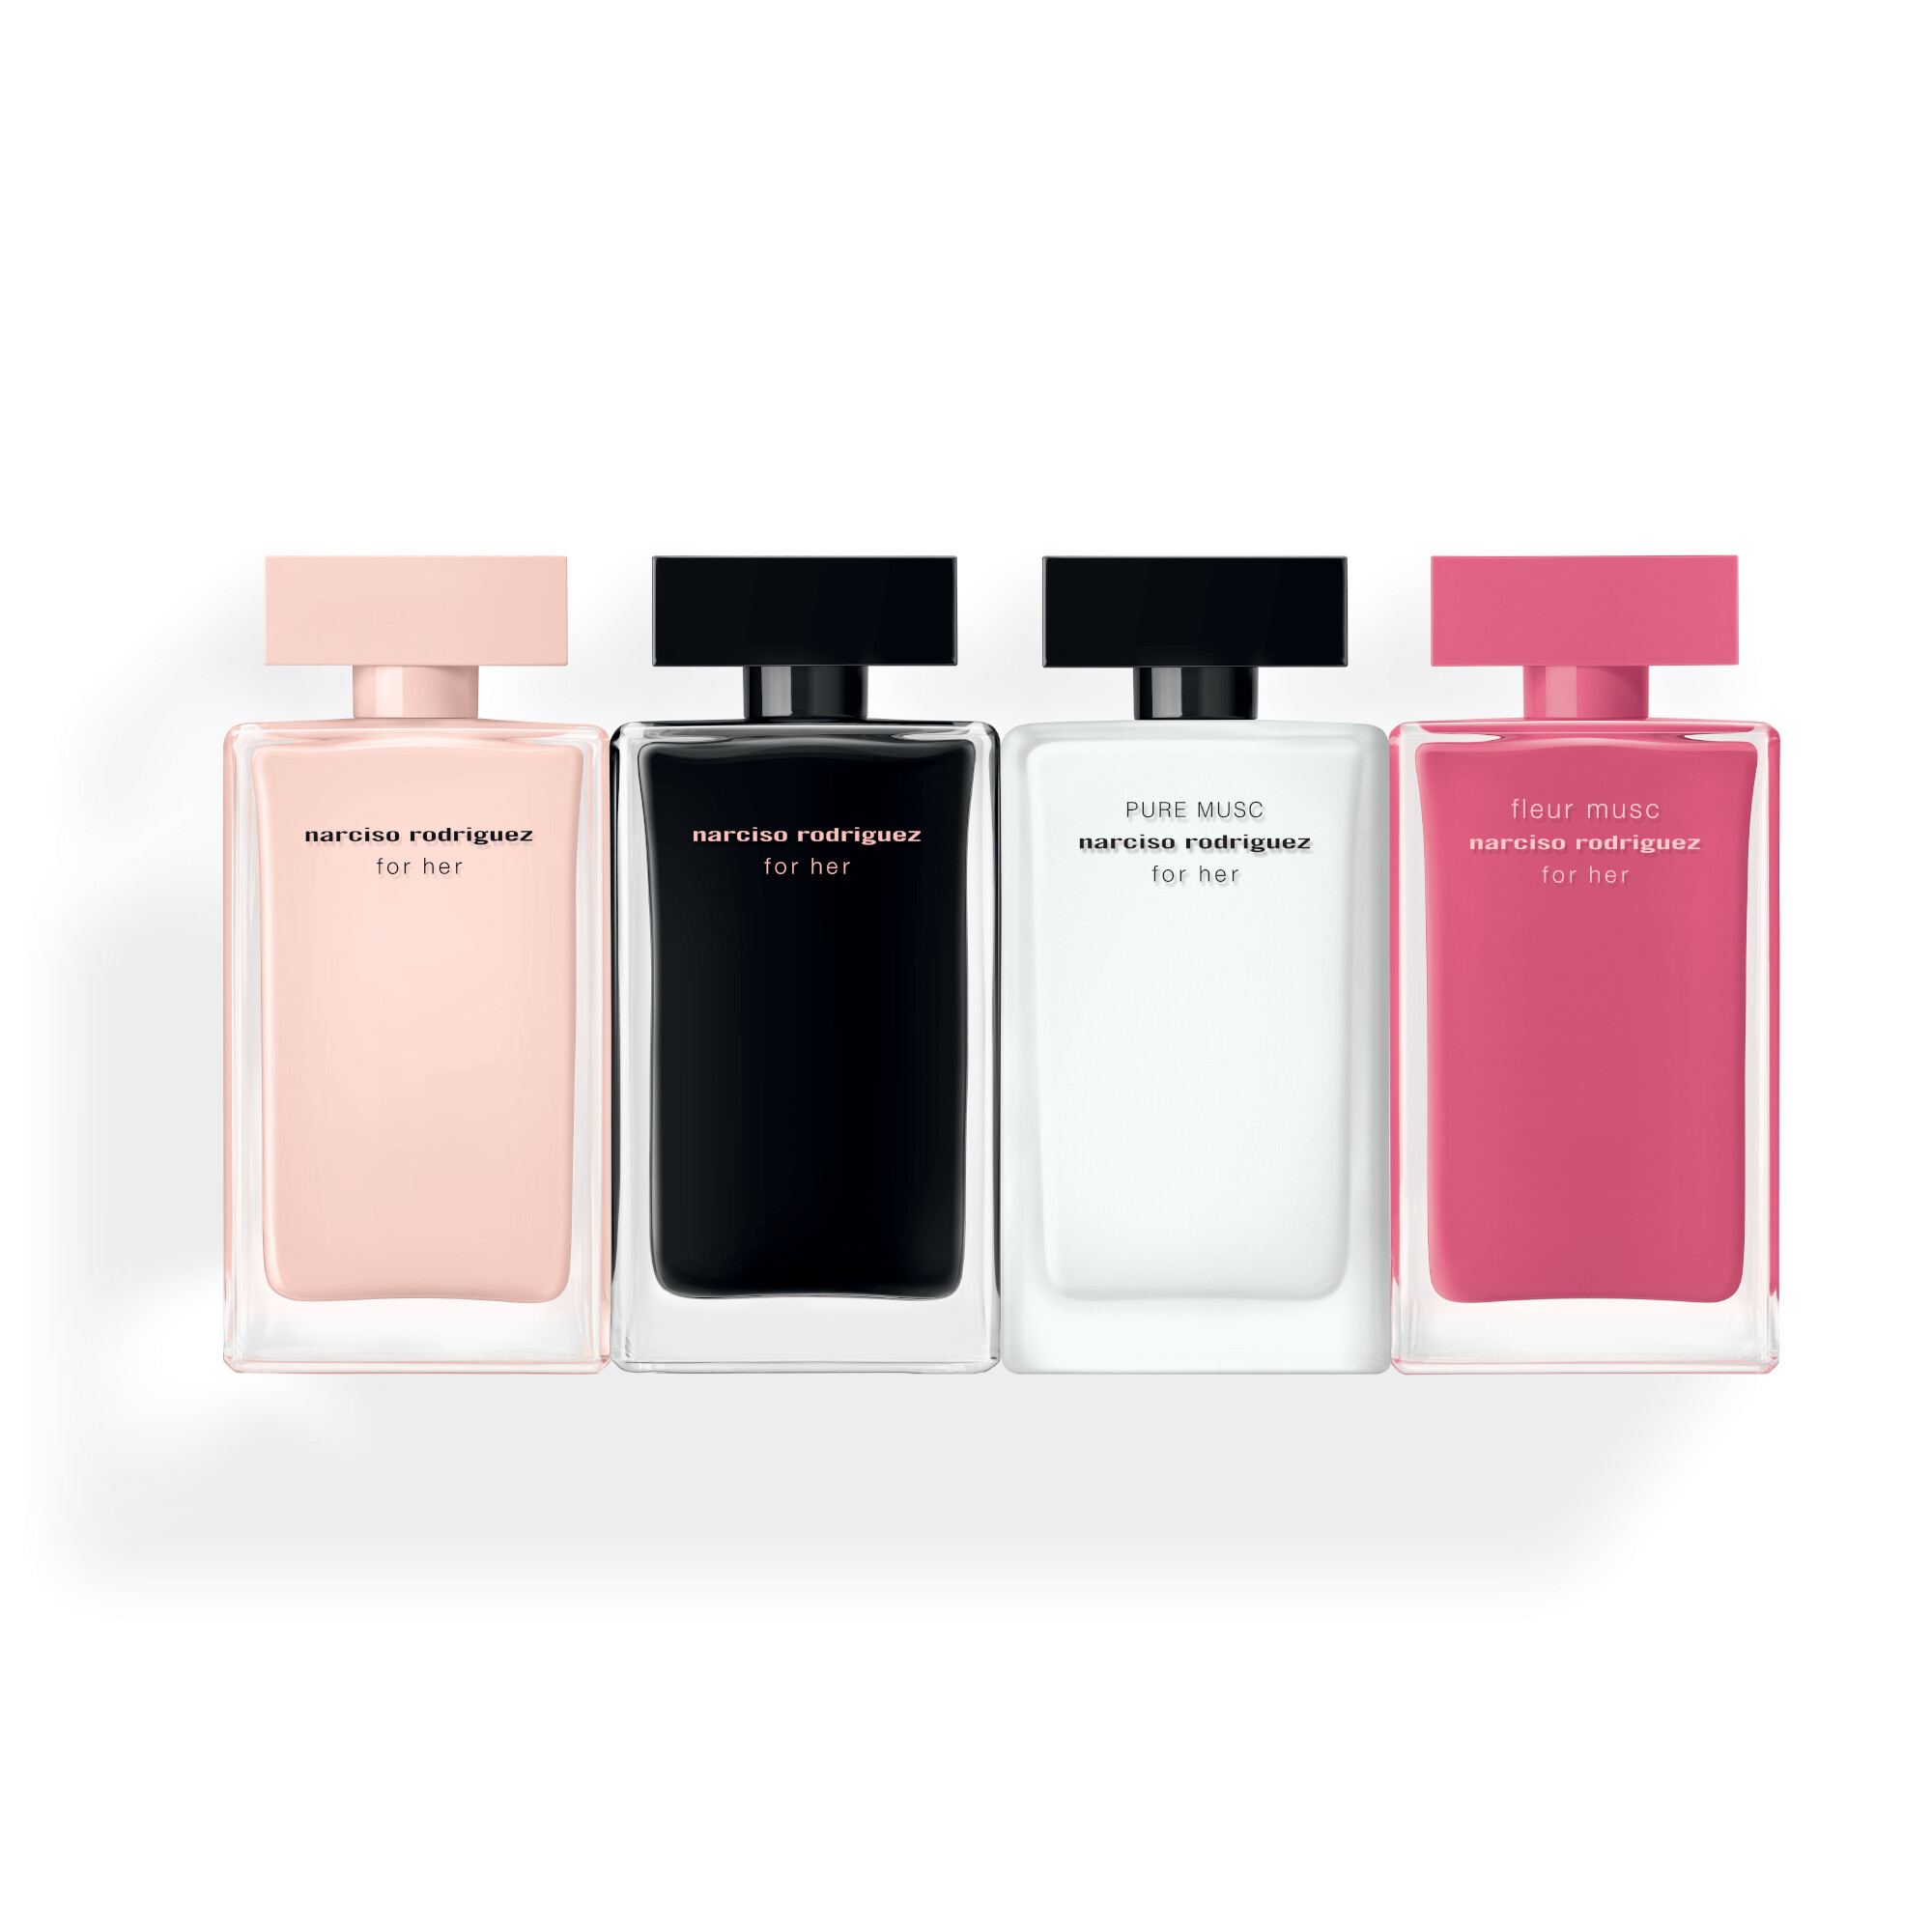 Narciso Rodriguez Narciso Rodriguez for her EDP bestellen